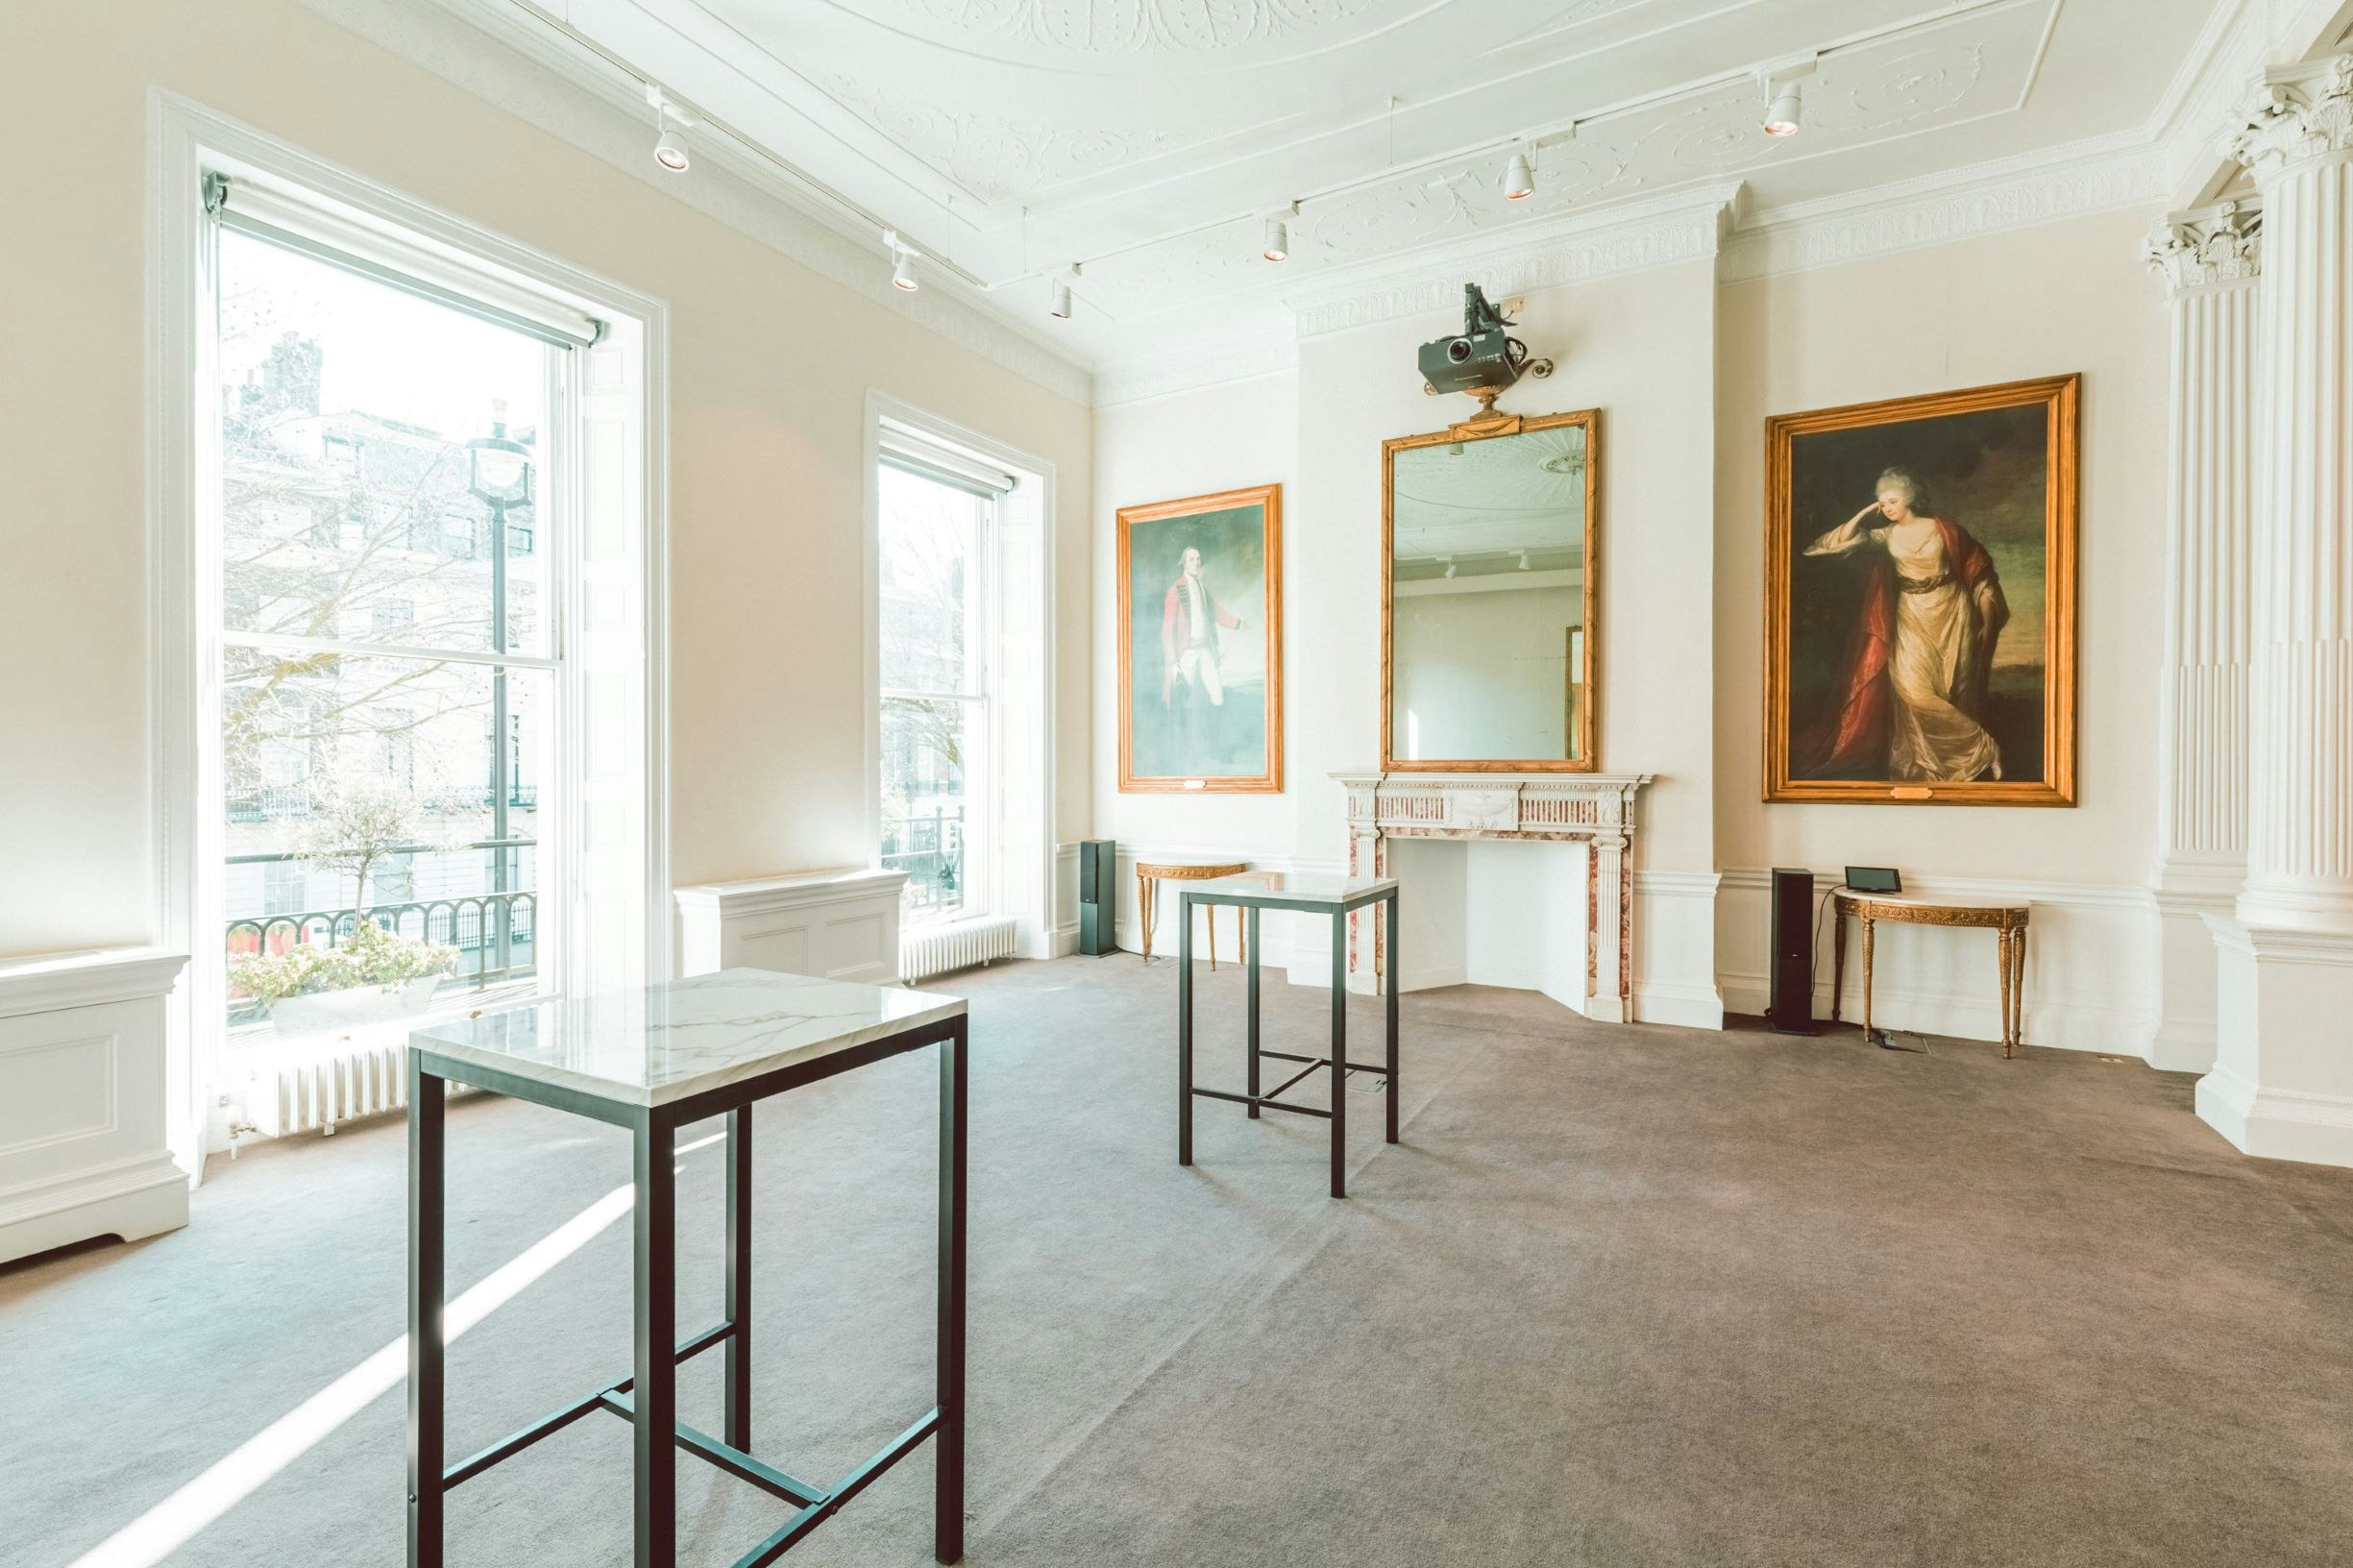 Birthday Party Venues in East London - 41 Portland Place